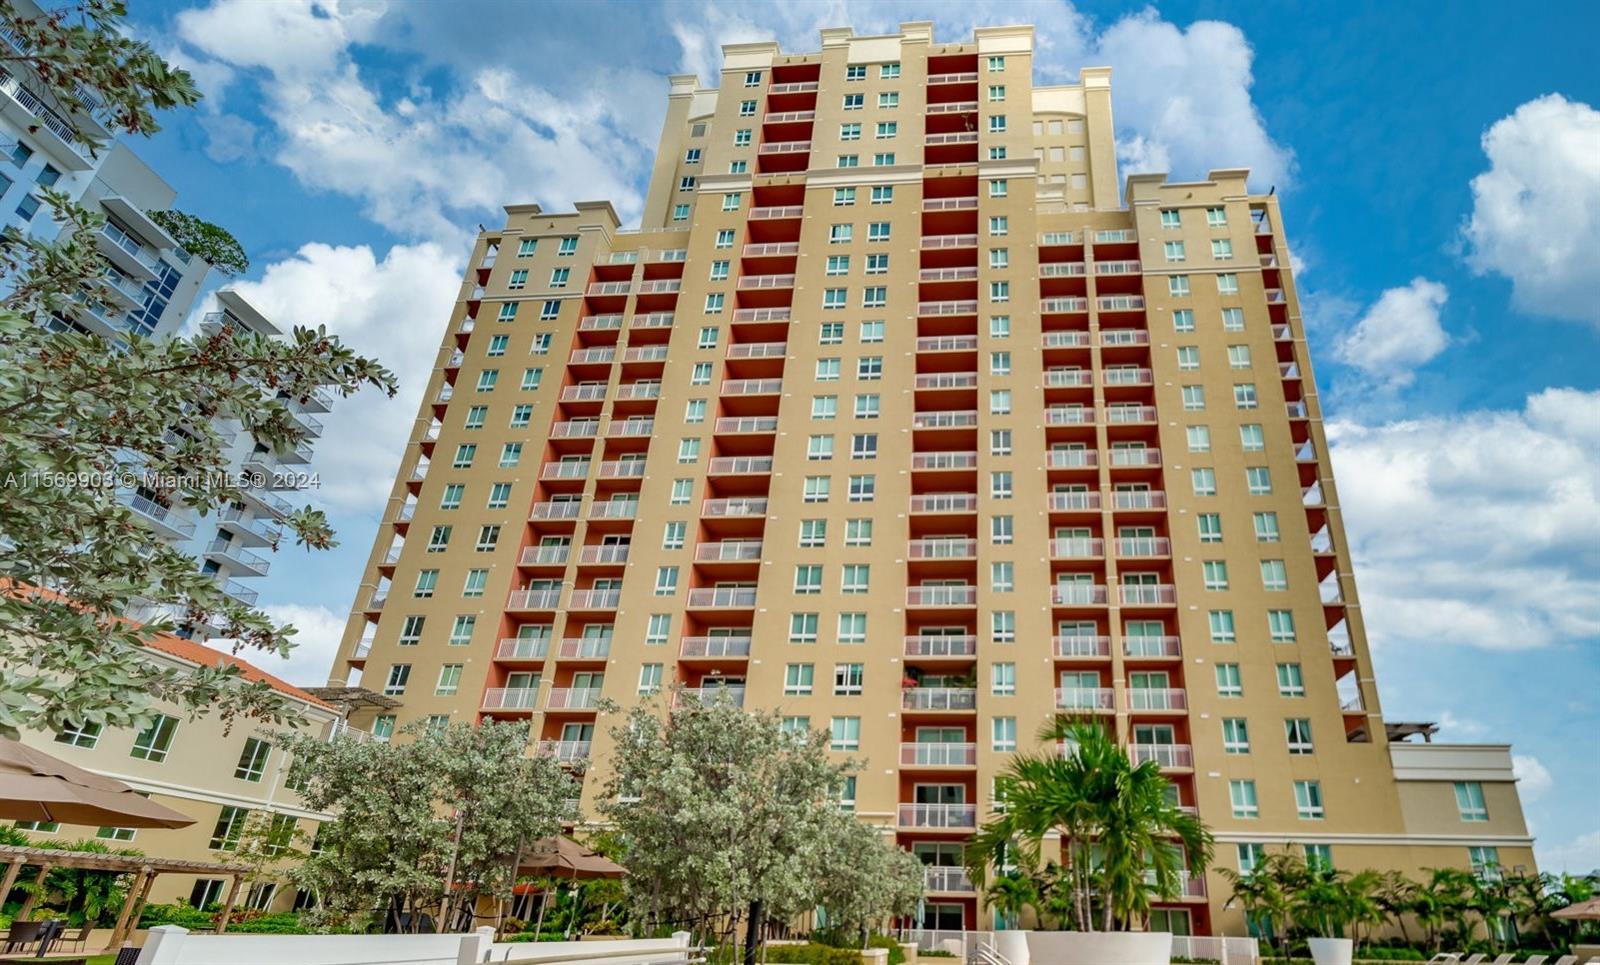 7355 SW 89th St 705N, Miami, Florida 33156, 1 Bedroom Bedrooms, ,1 BathroomBathrooms,Residentiallease,For Rent,7355 SW 89th St 705N,A11569903